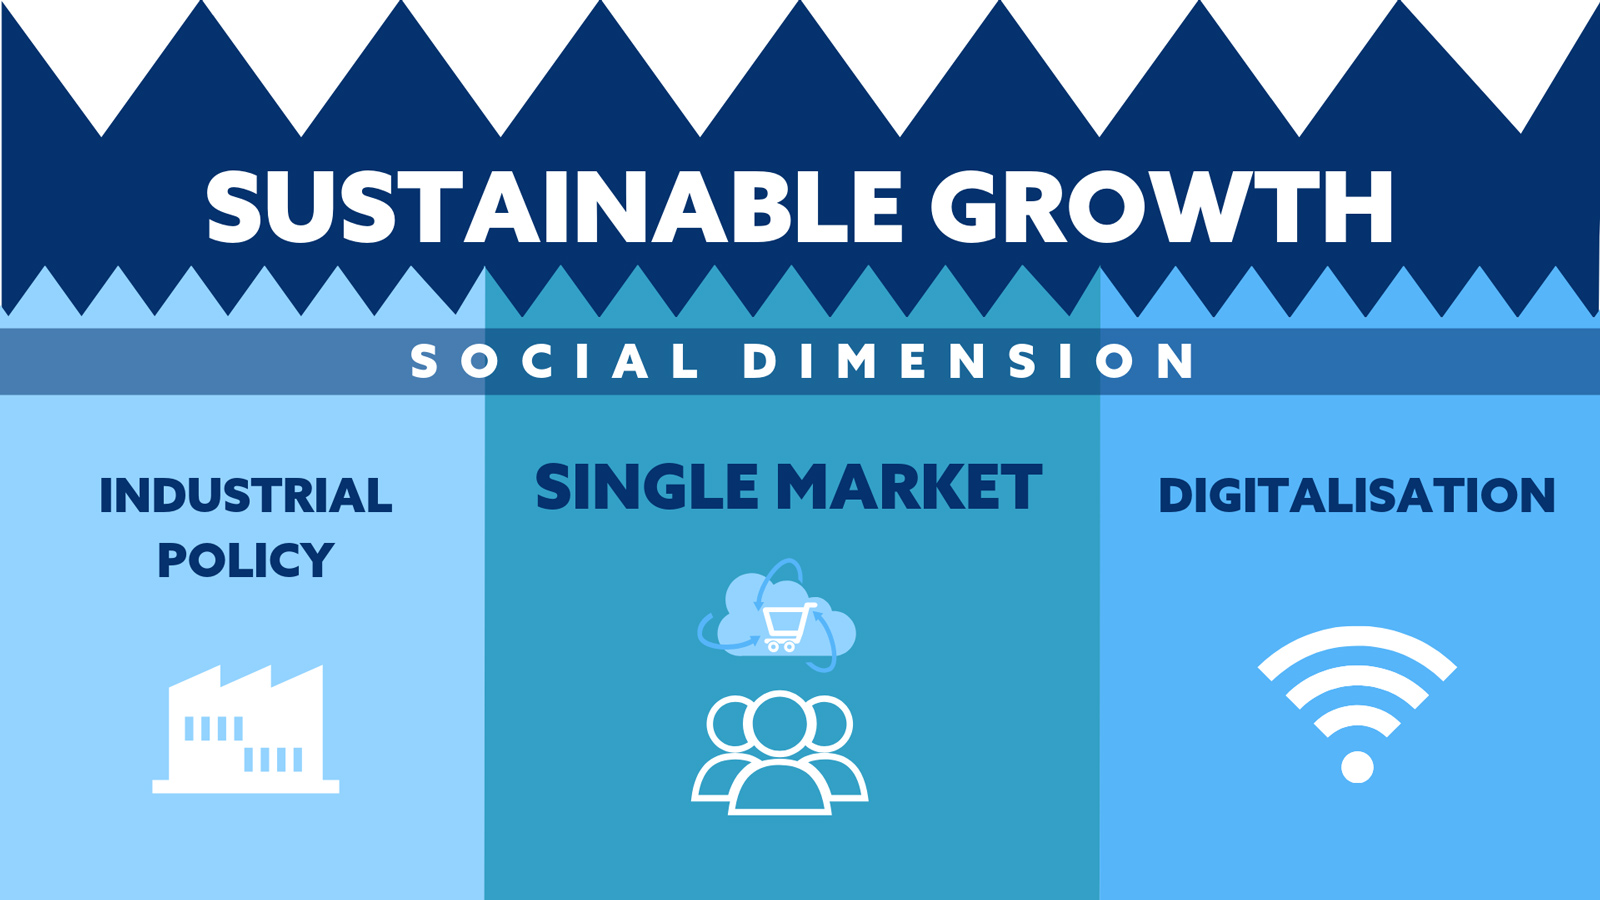 The image shows the elements of sustainable growth: industrial policy, the single market and digitalisation.